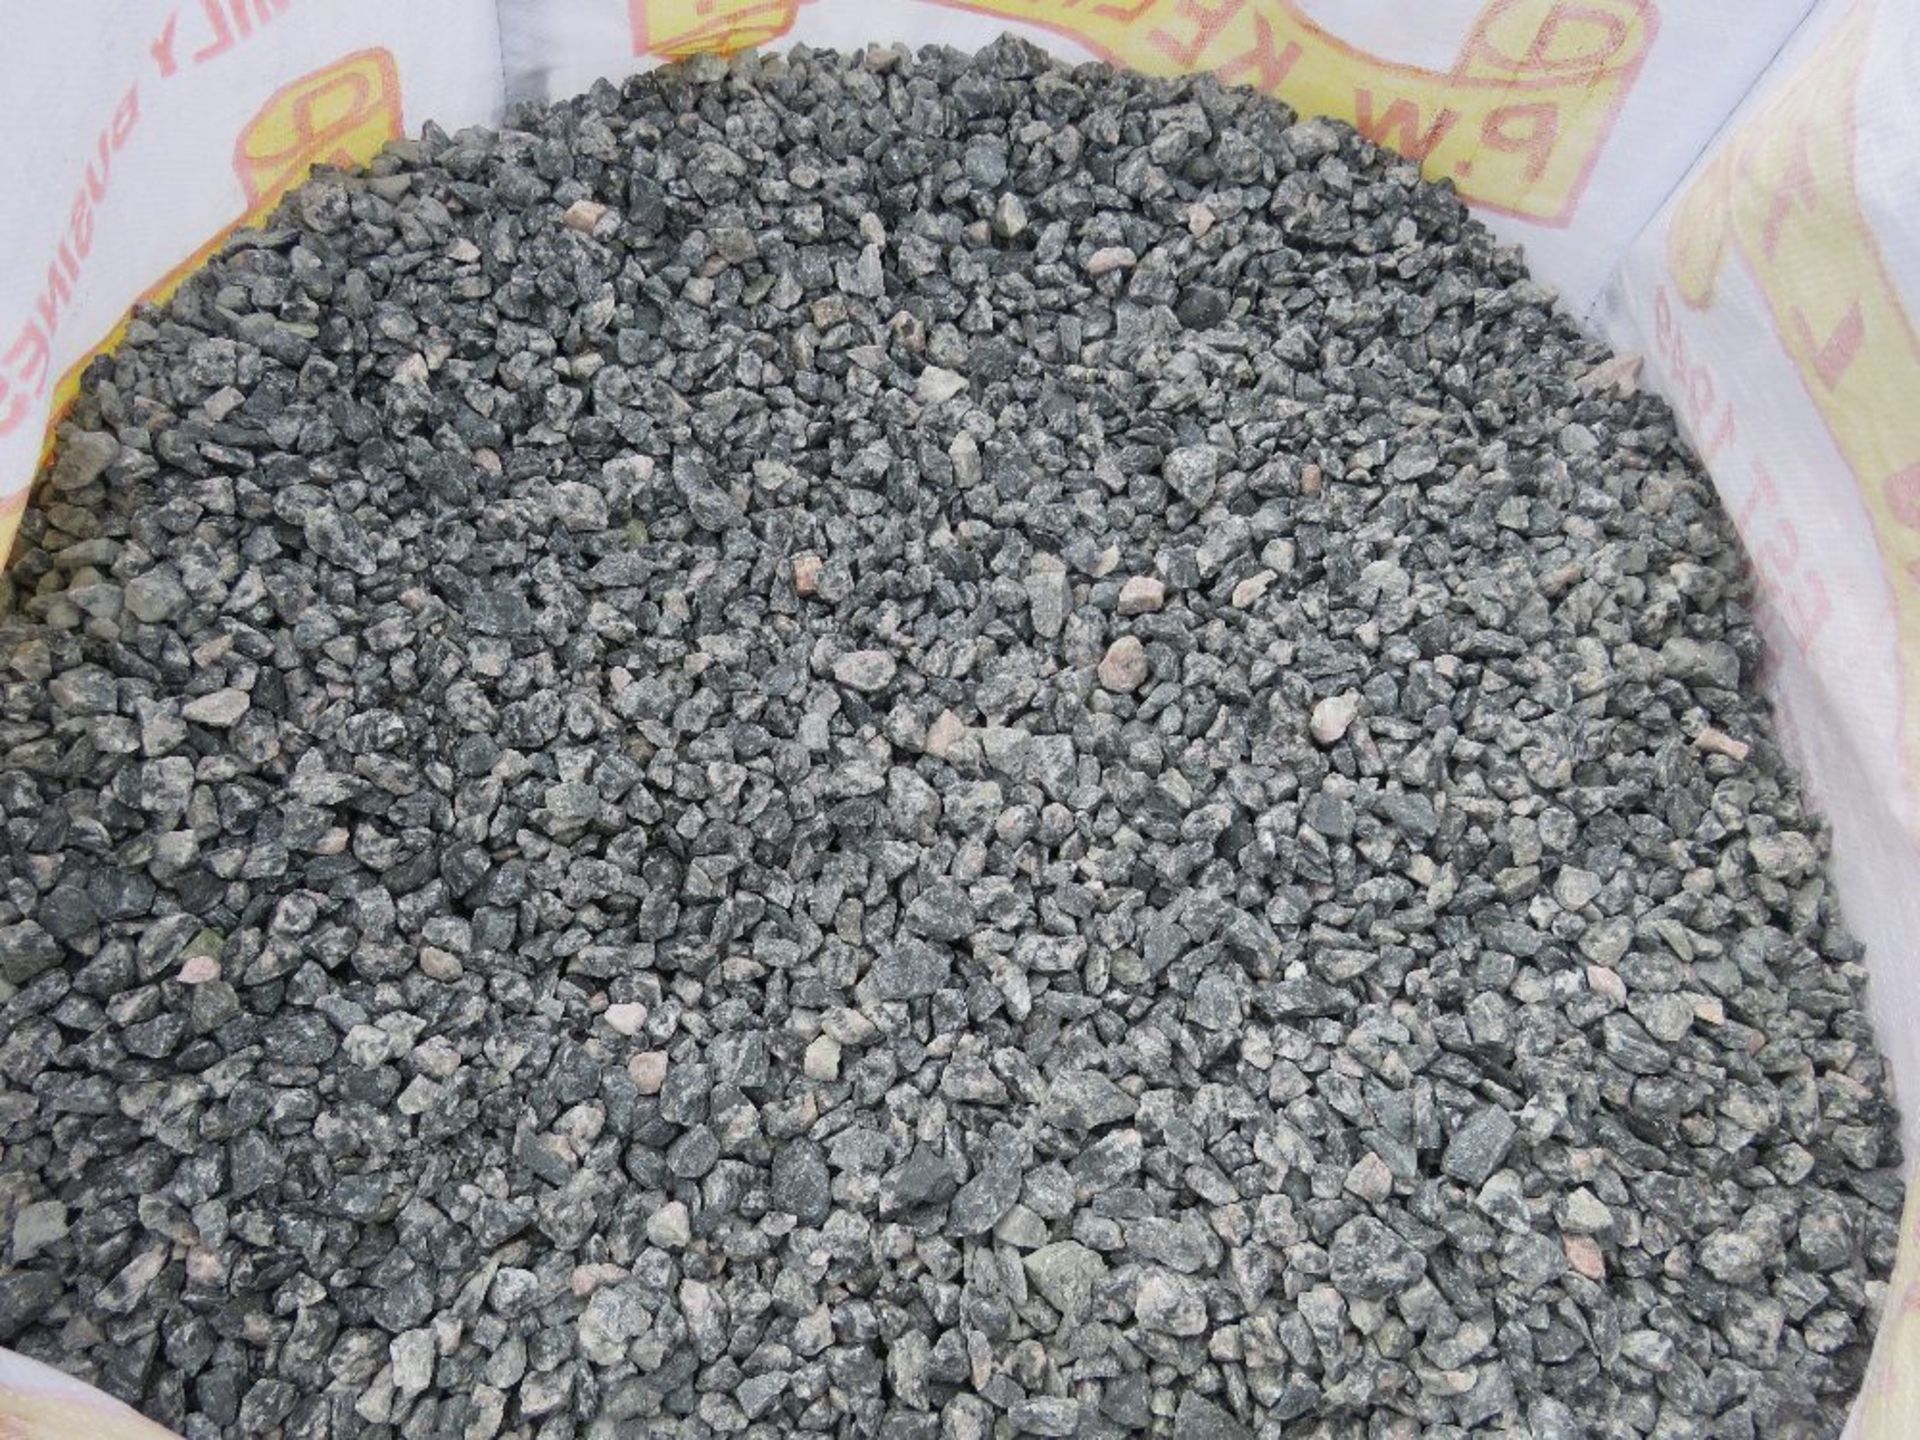 BULK BAG OF DECORATIVE GRANITE CHIPPINGS 20MM SIZE APPROX. CANCELLED ORDER. THIS LOT IS SOLD UNDER